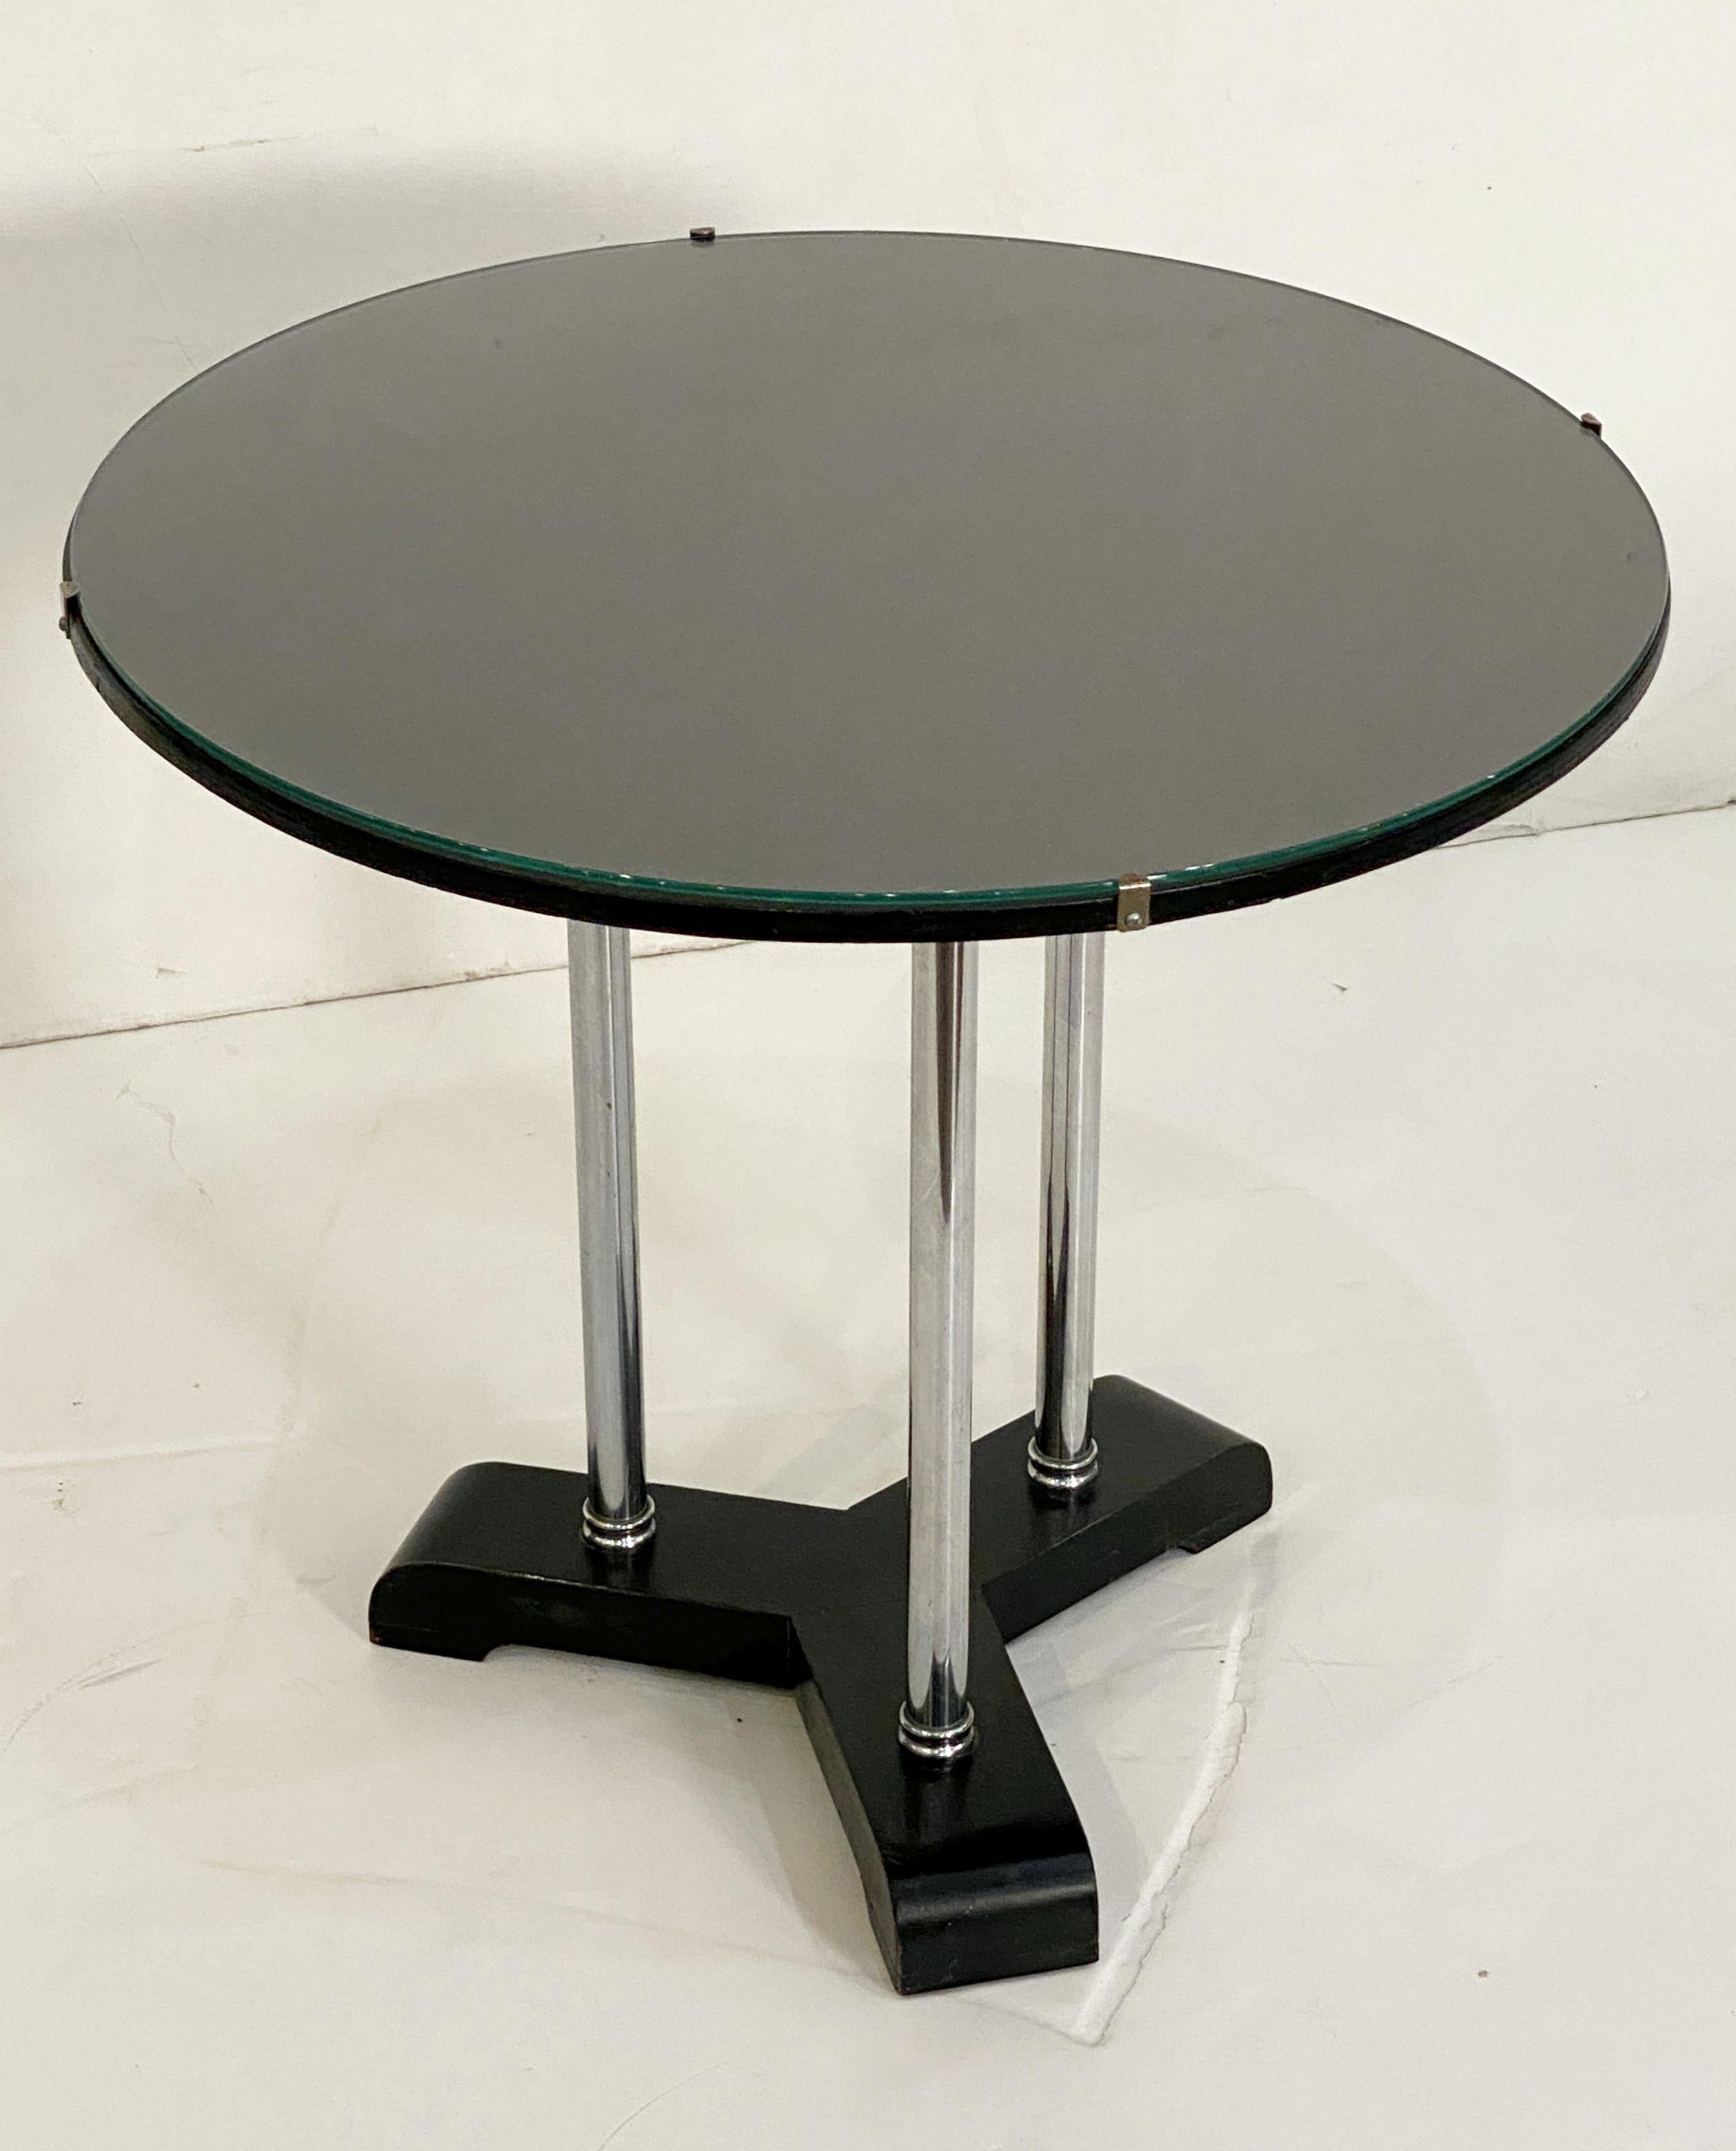 English Art Deco Round Drinks Tripod Table of Chrome, Ebonized Wood, and Glass For Sale 4